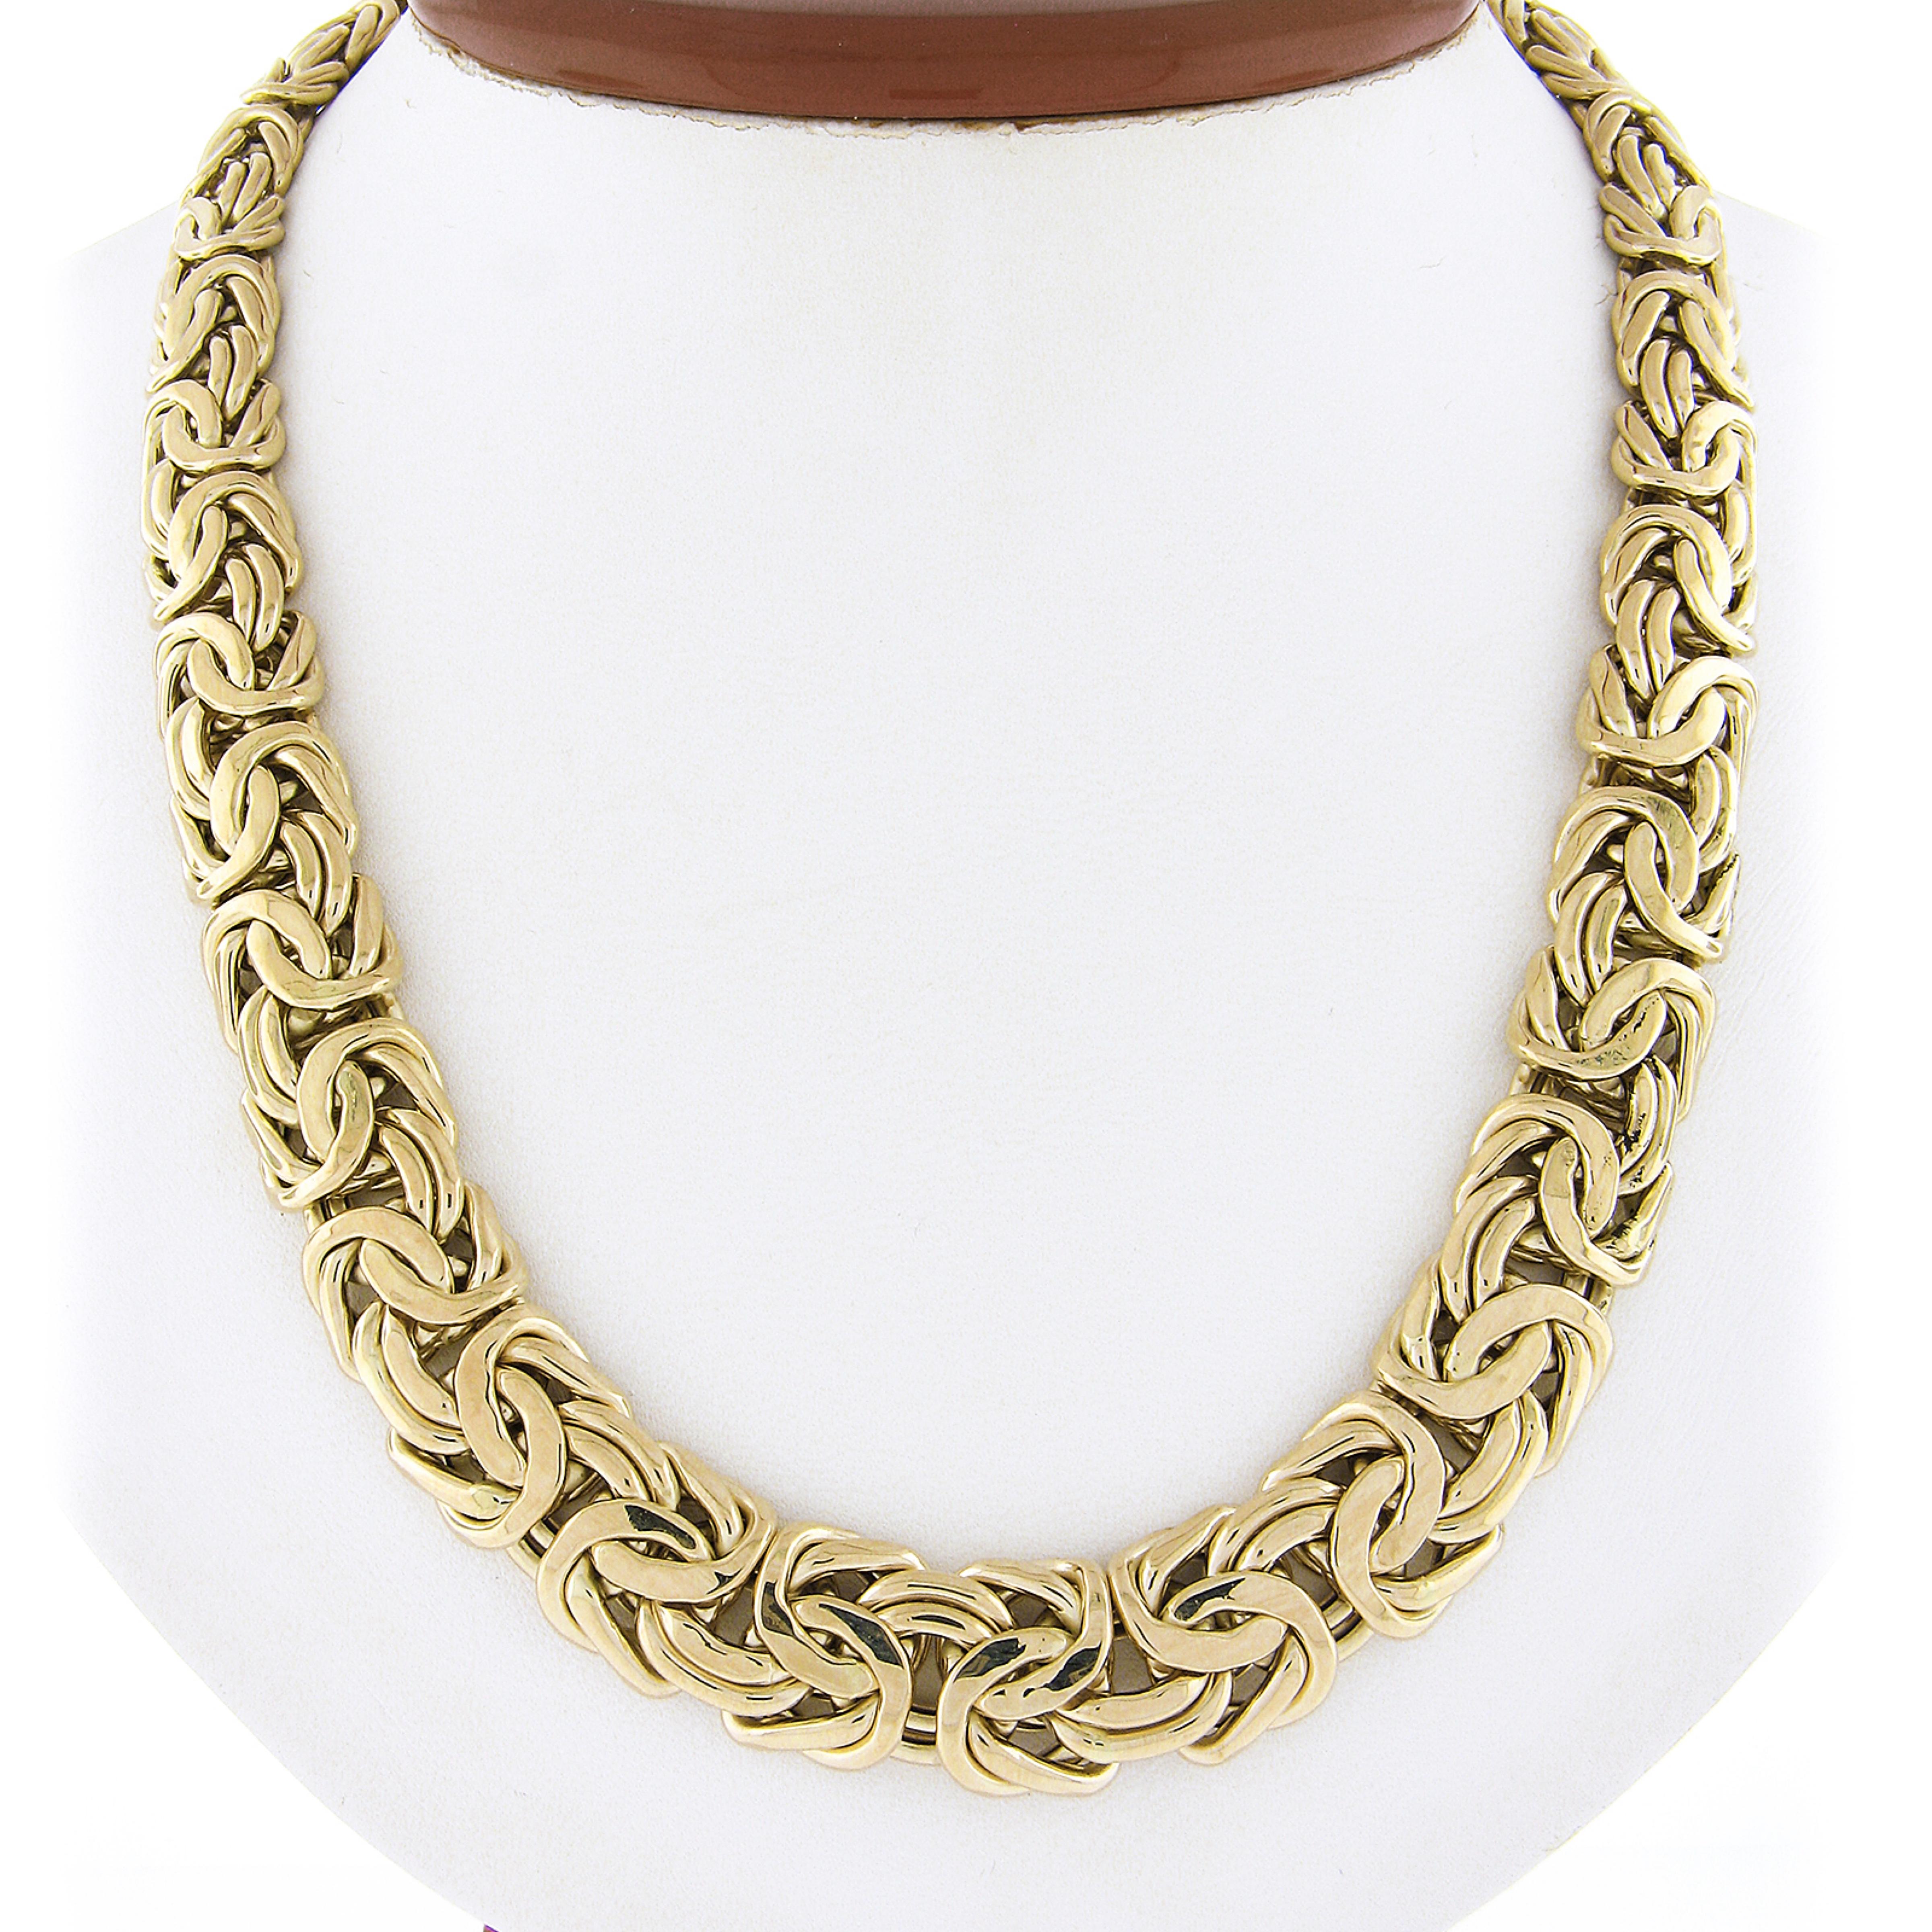 This well made Italian made byzantine link chain necklace is crafted in solid 14k yellow gold. The necklace measures 18 inches in length, graduates from 10mm to 14.8mm in width, with a flat and domed style giving it a nice bold look around the neck.